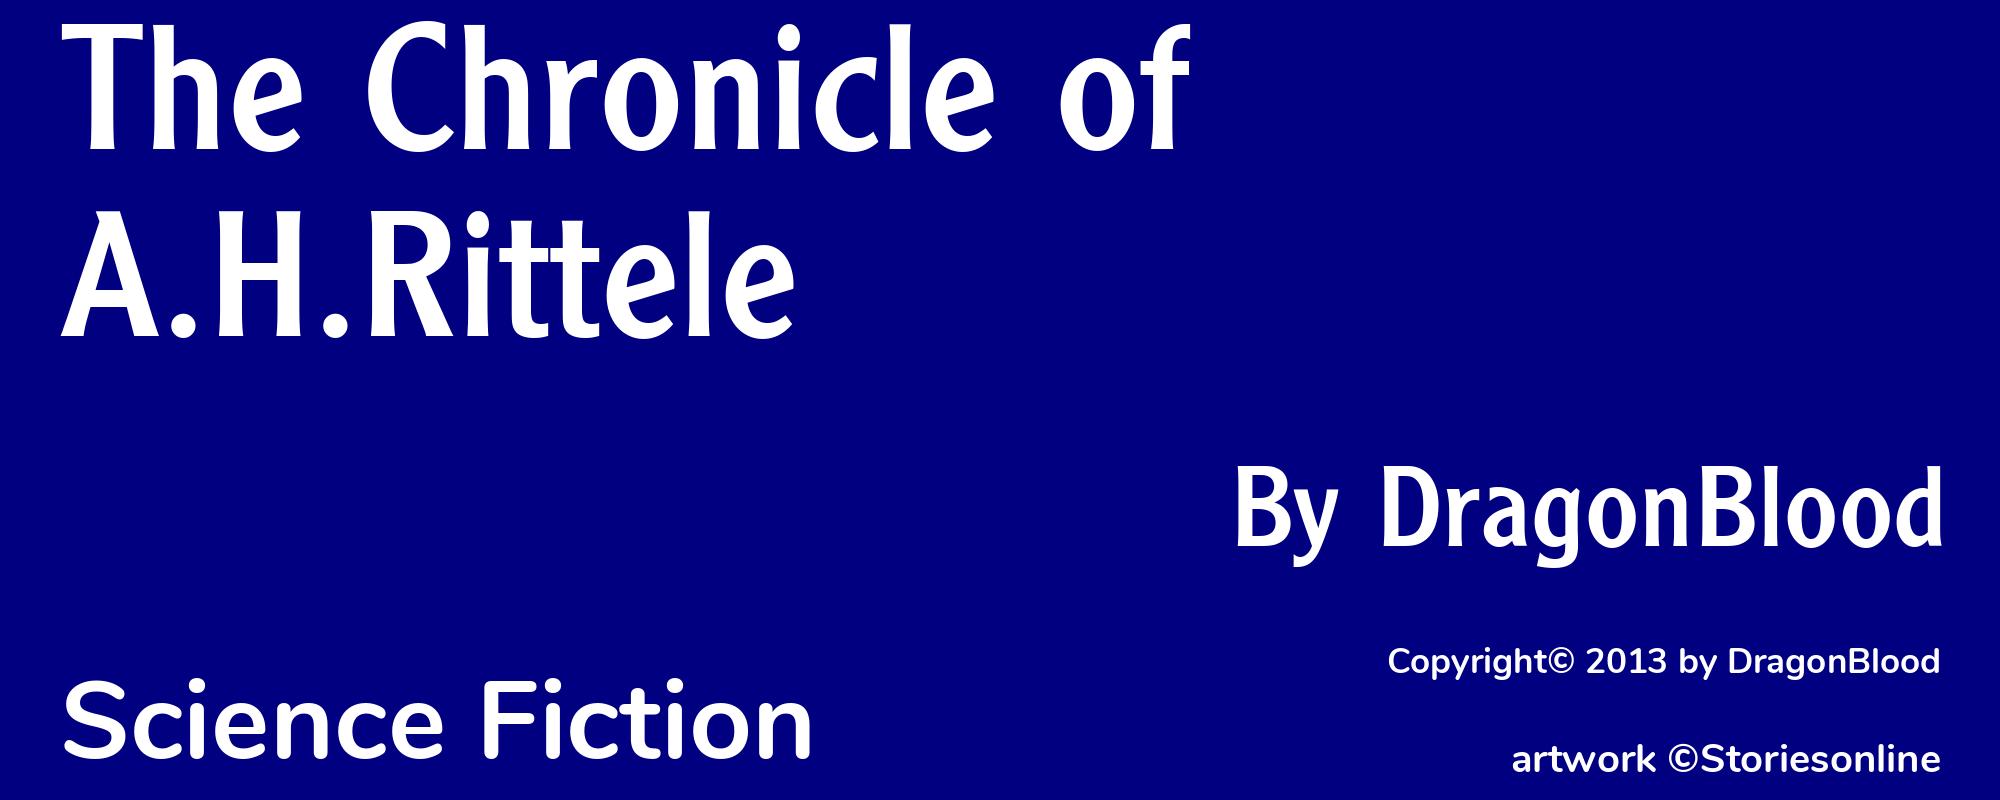 The Chronicle of A.H.Rittele - Cover